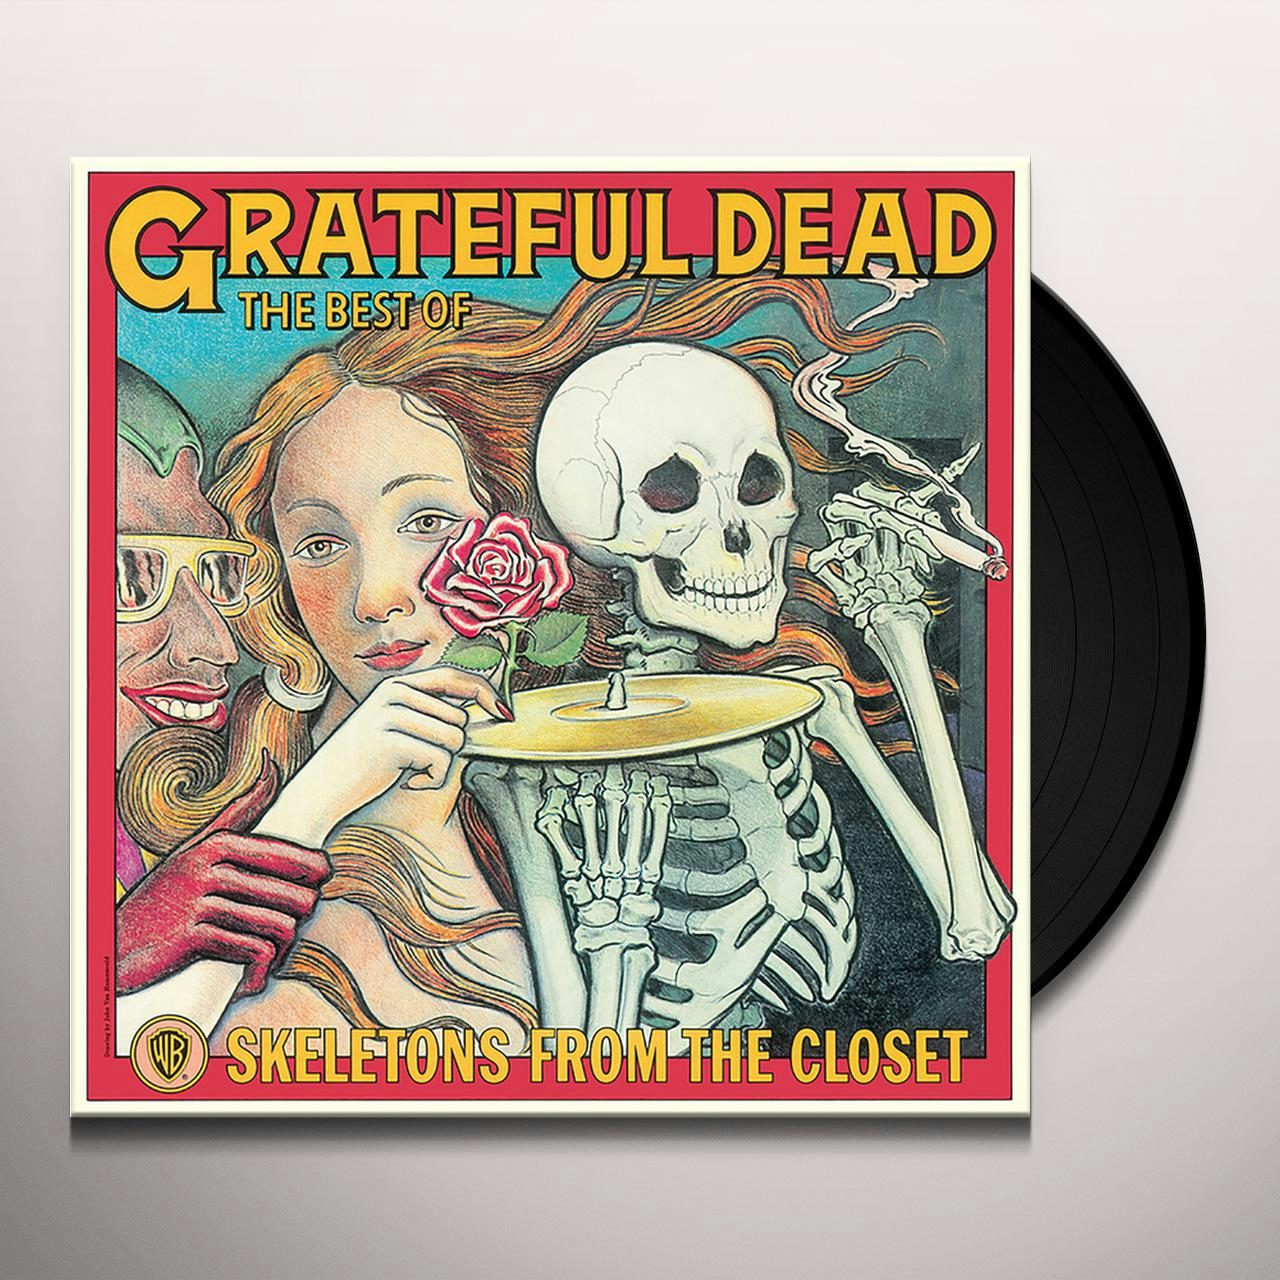 Vinyl LP Record Framed and Ready to Hang Grateful Dead Music Gift Display,Music Wall Art Skeletons From The Closet